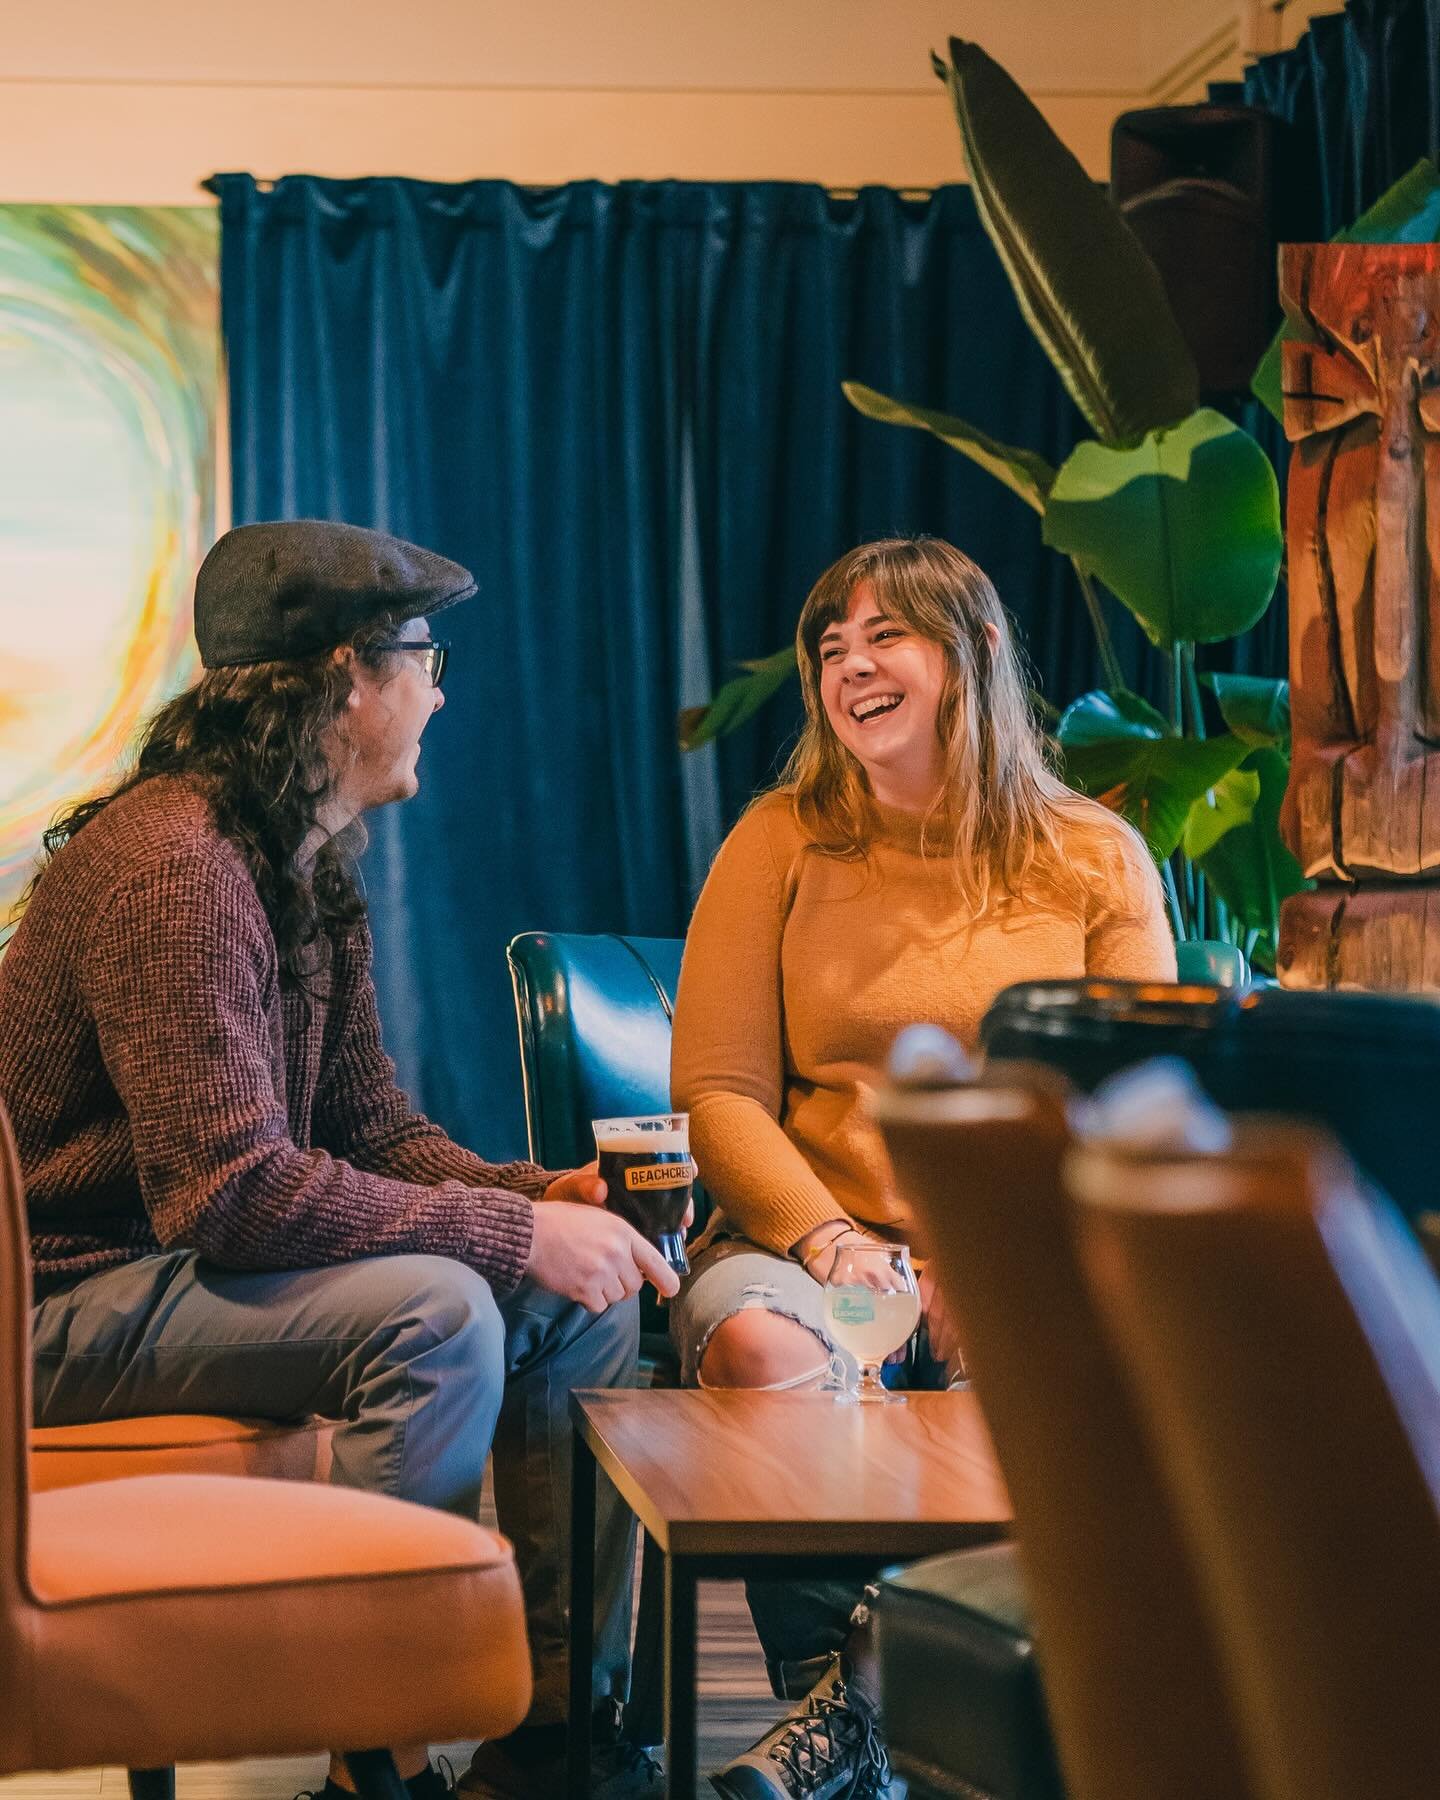 Good laughs, great friends and fresh small batch brews are our favorite kind of weekend plans.

Open Saturdays 12-8 Live Music at 6 pm
Open Sundays 12-7 Live Music at 4 pm

#Beachcrestbrewing #CoastalComunityCraft #neighborhoodbrewery #exploreoregonc